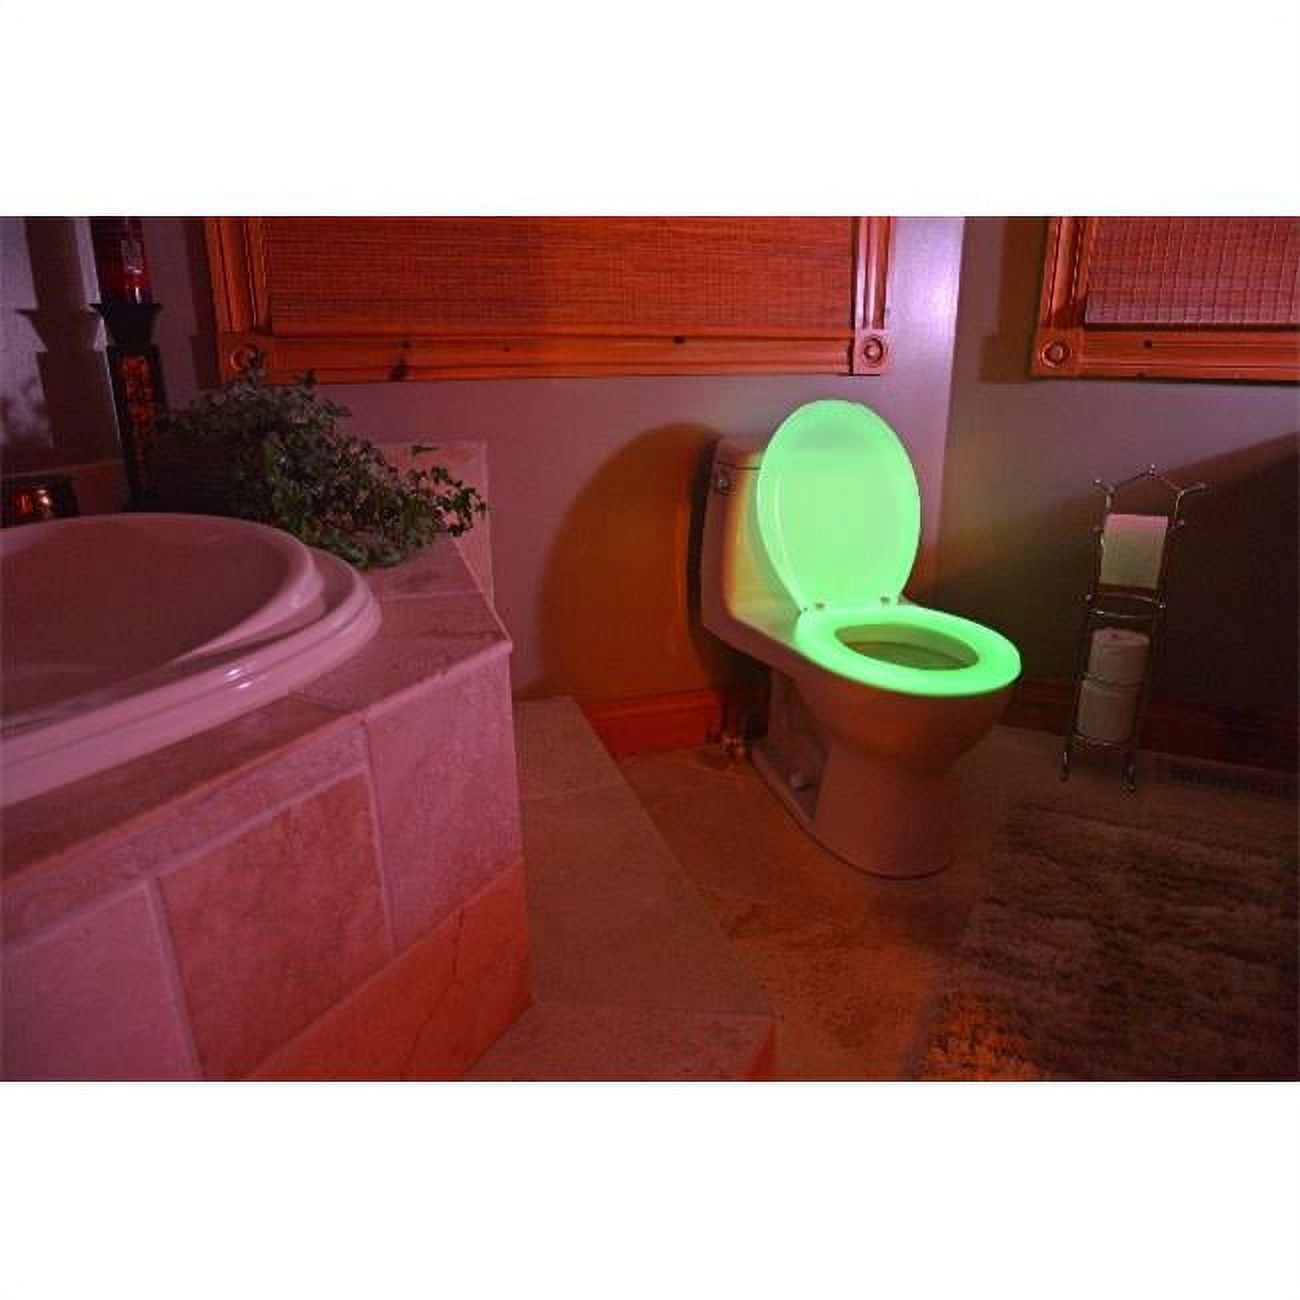 I have a glow n the dark toilet seat i asked my mom to get it and